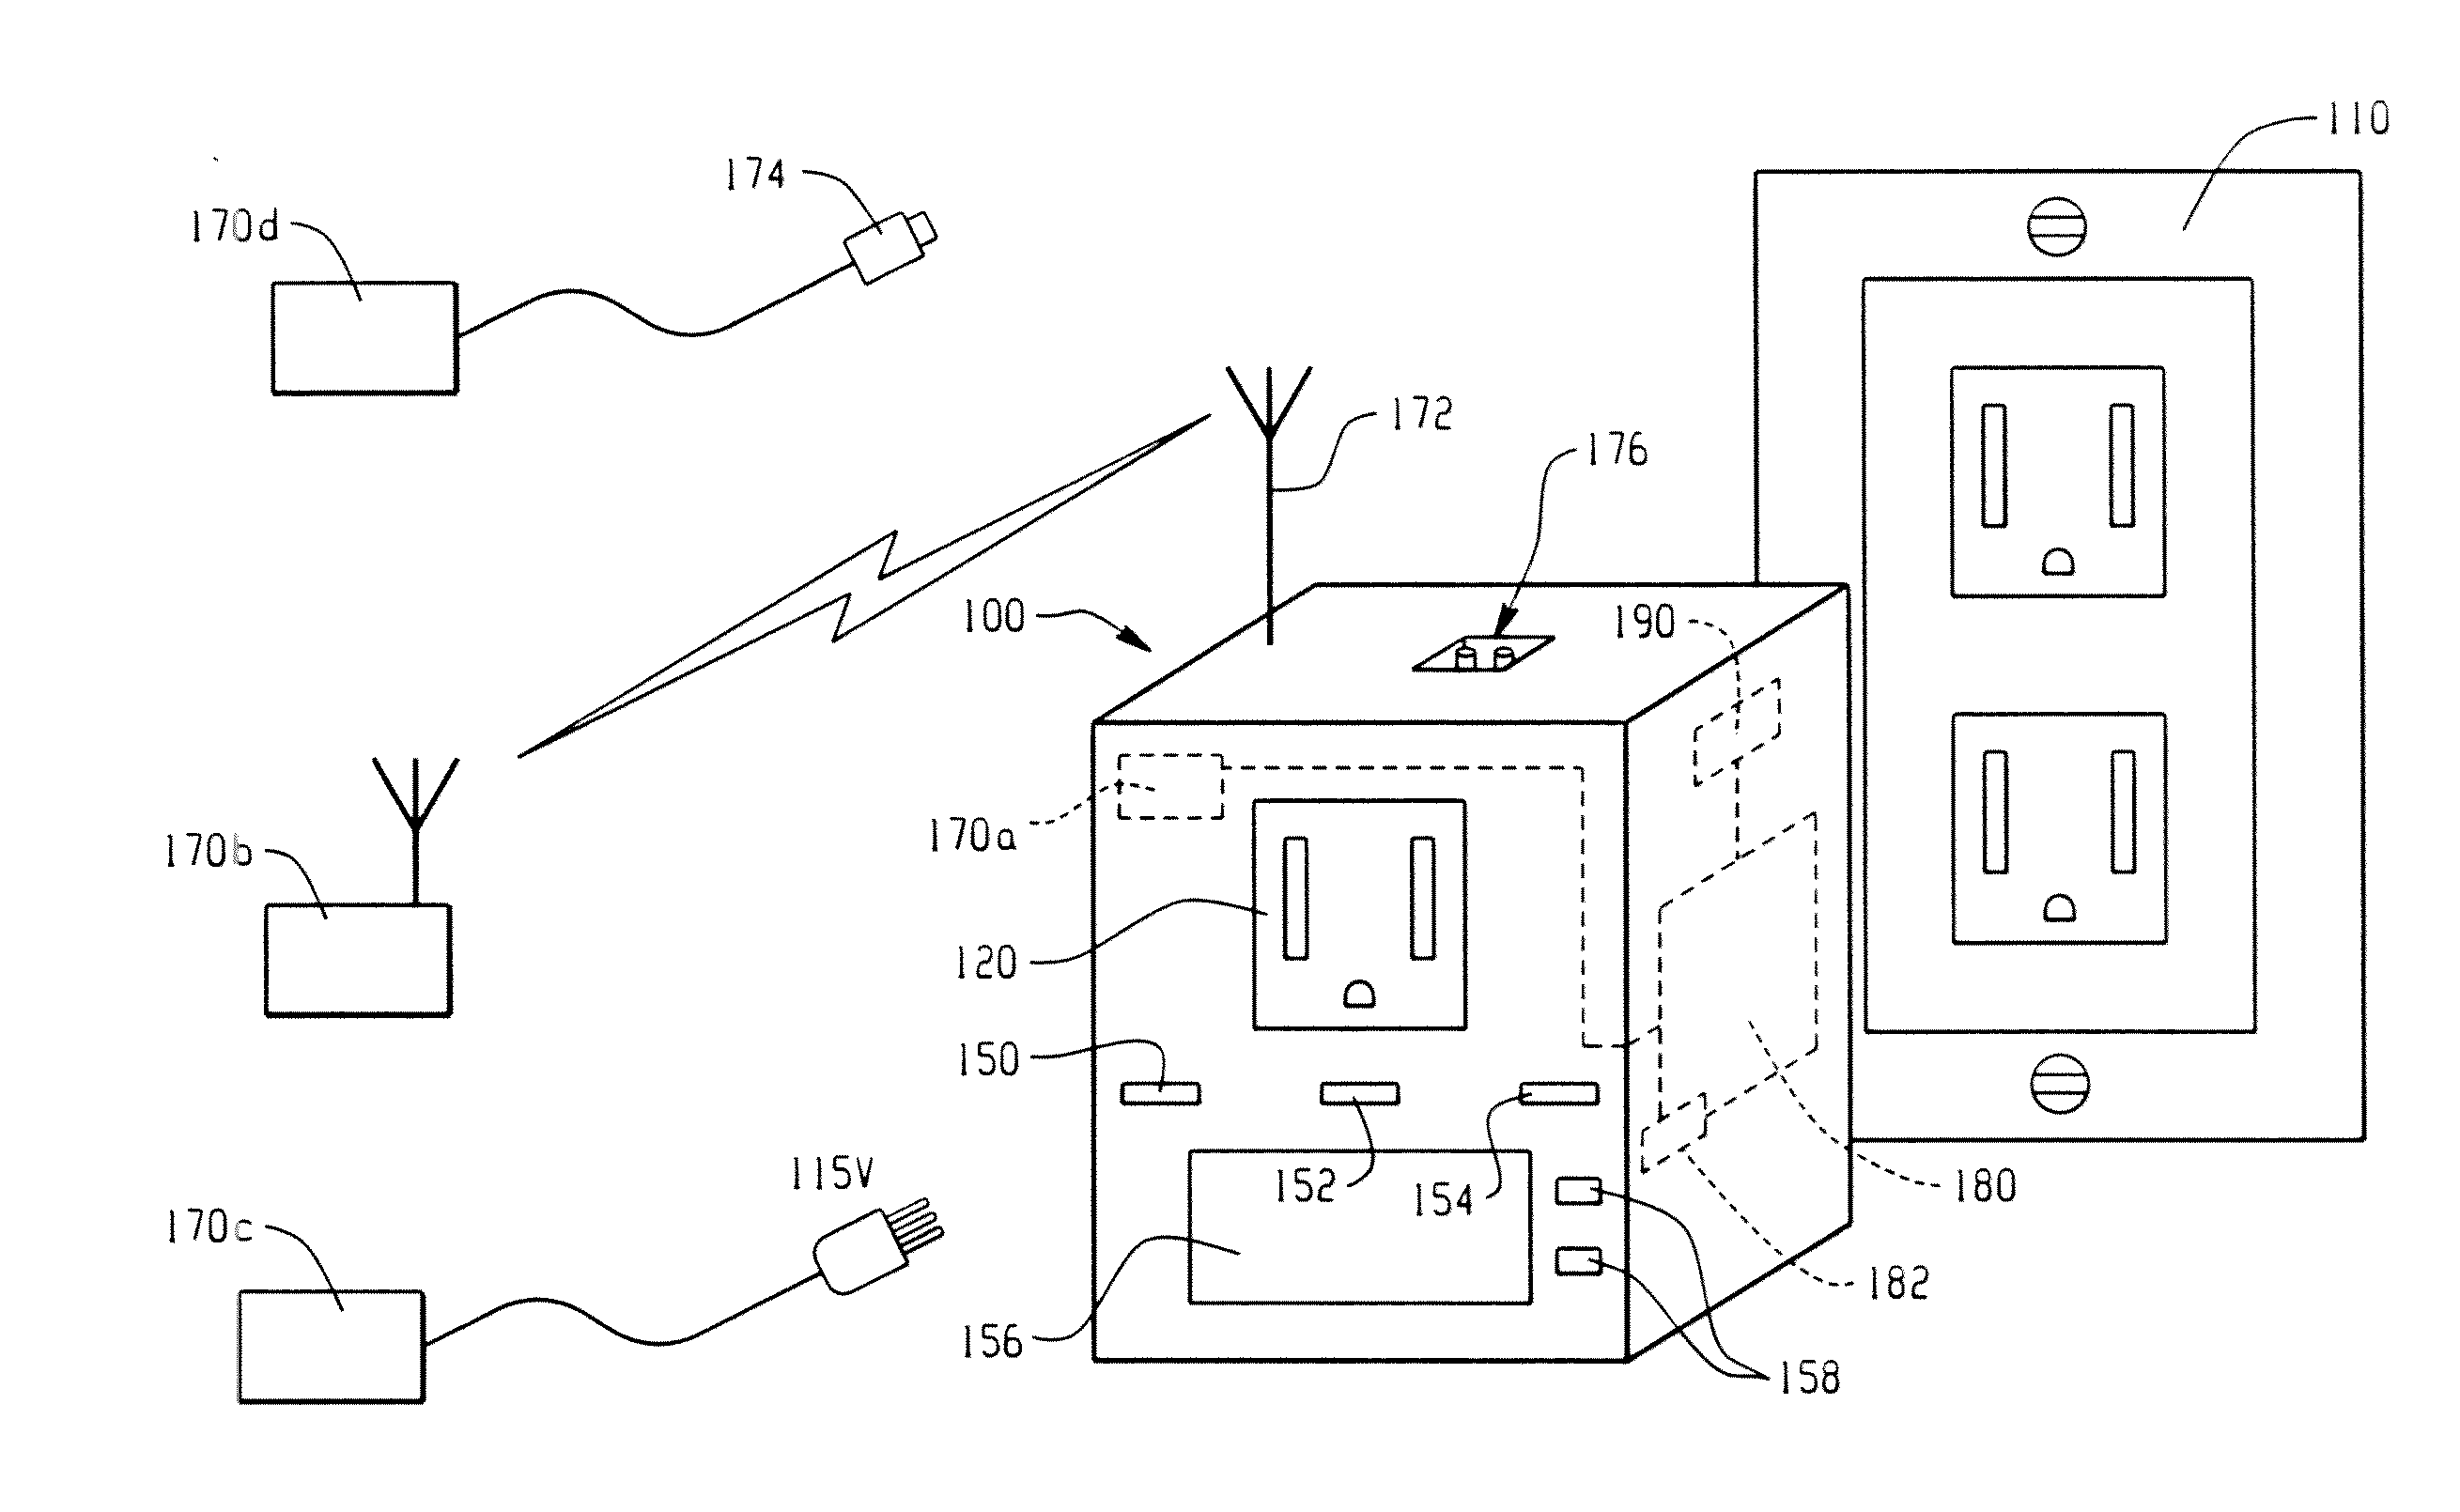 Smart plug with internal condition-based demand response capability